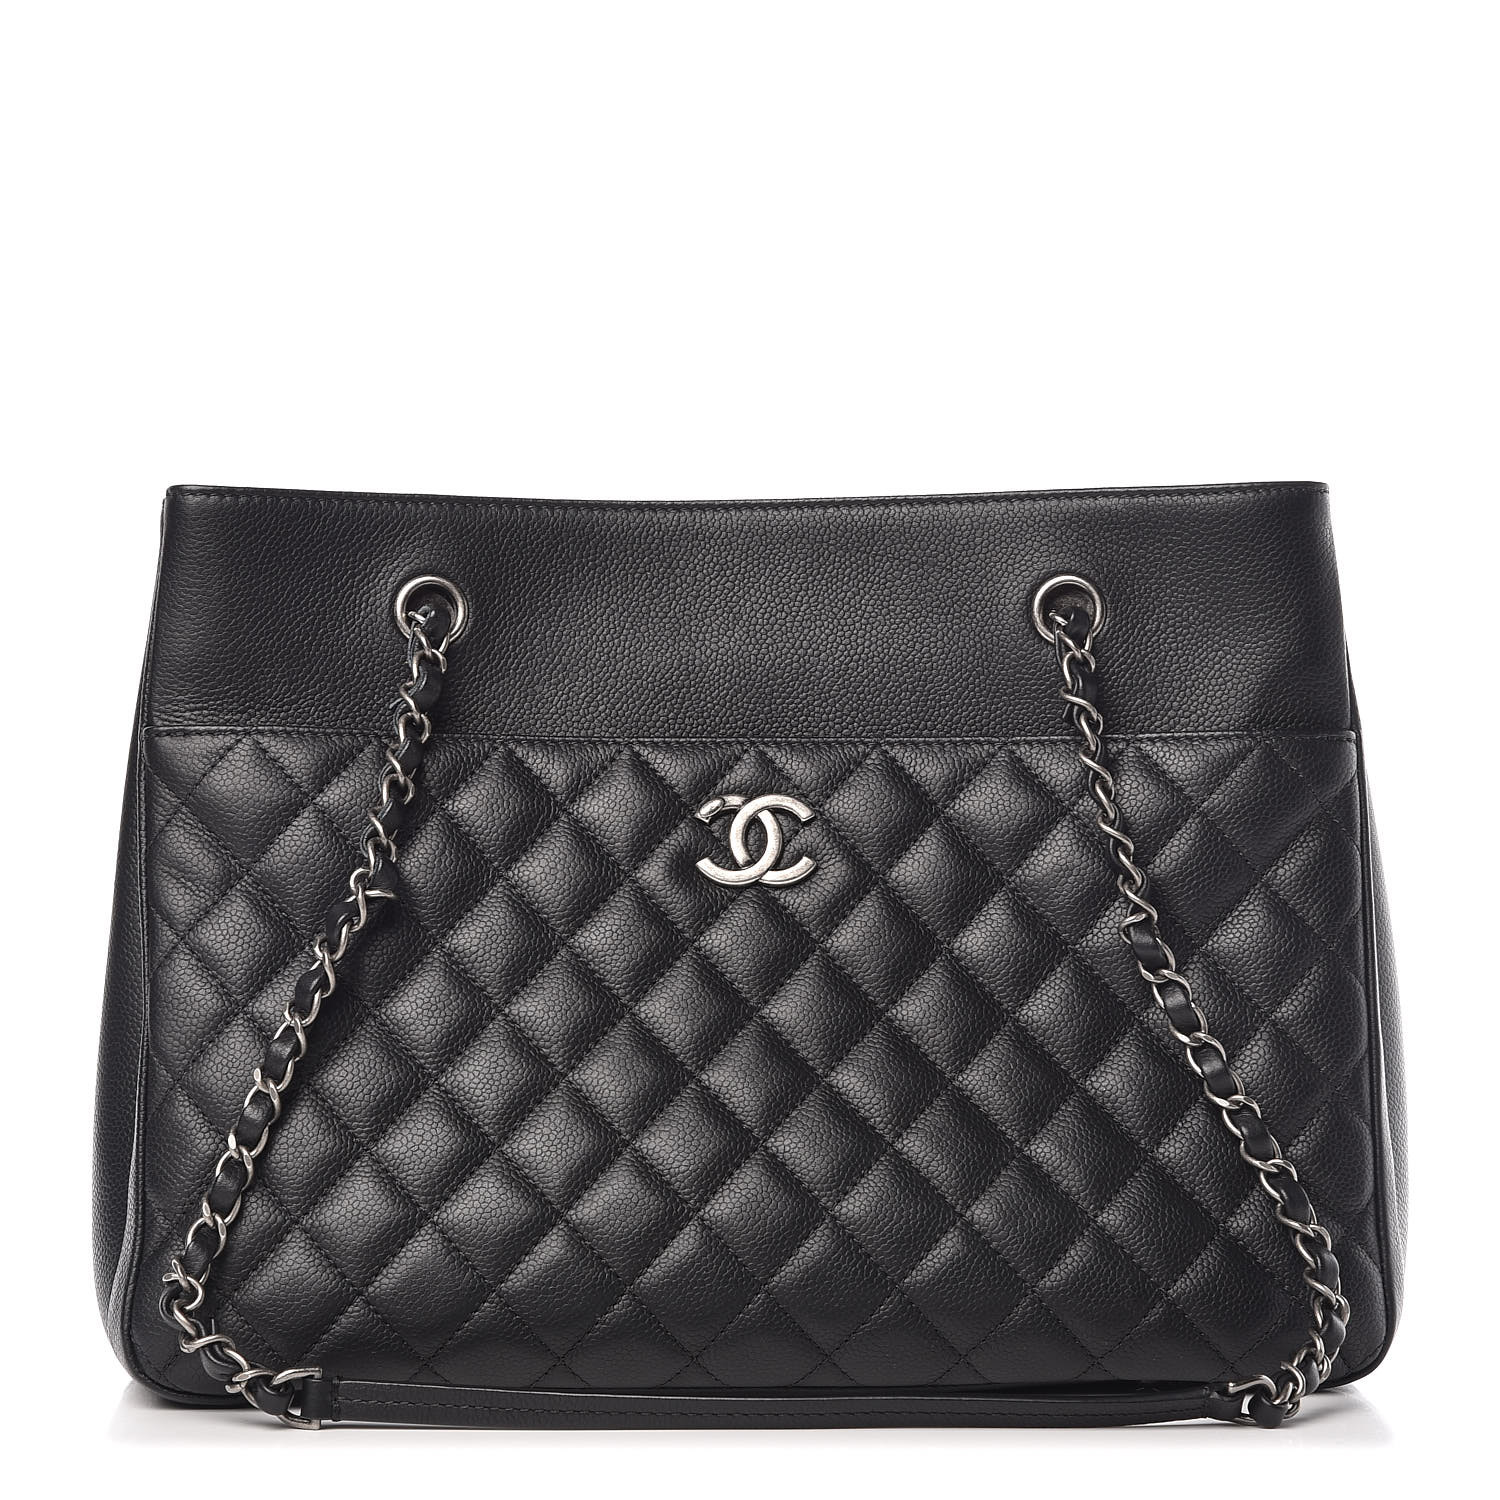 CHANEL Caviar Quilted Urban Companion Shopping Tote Black 361754